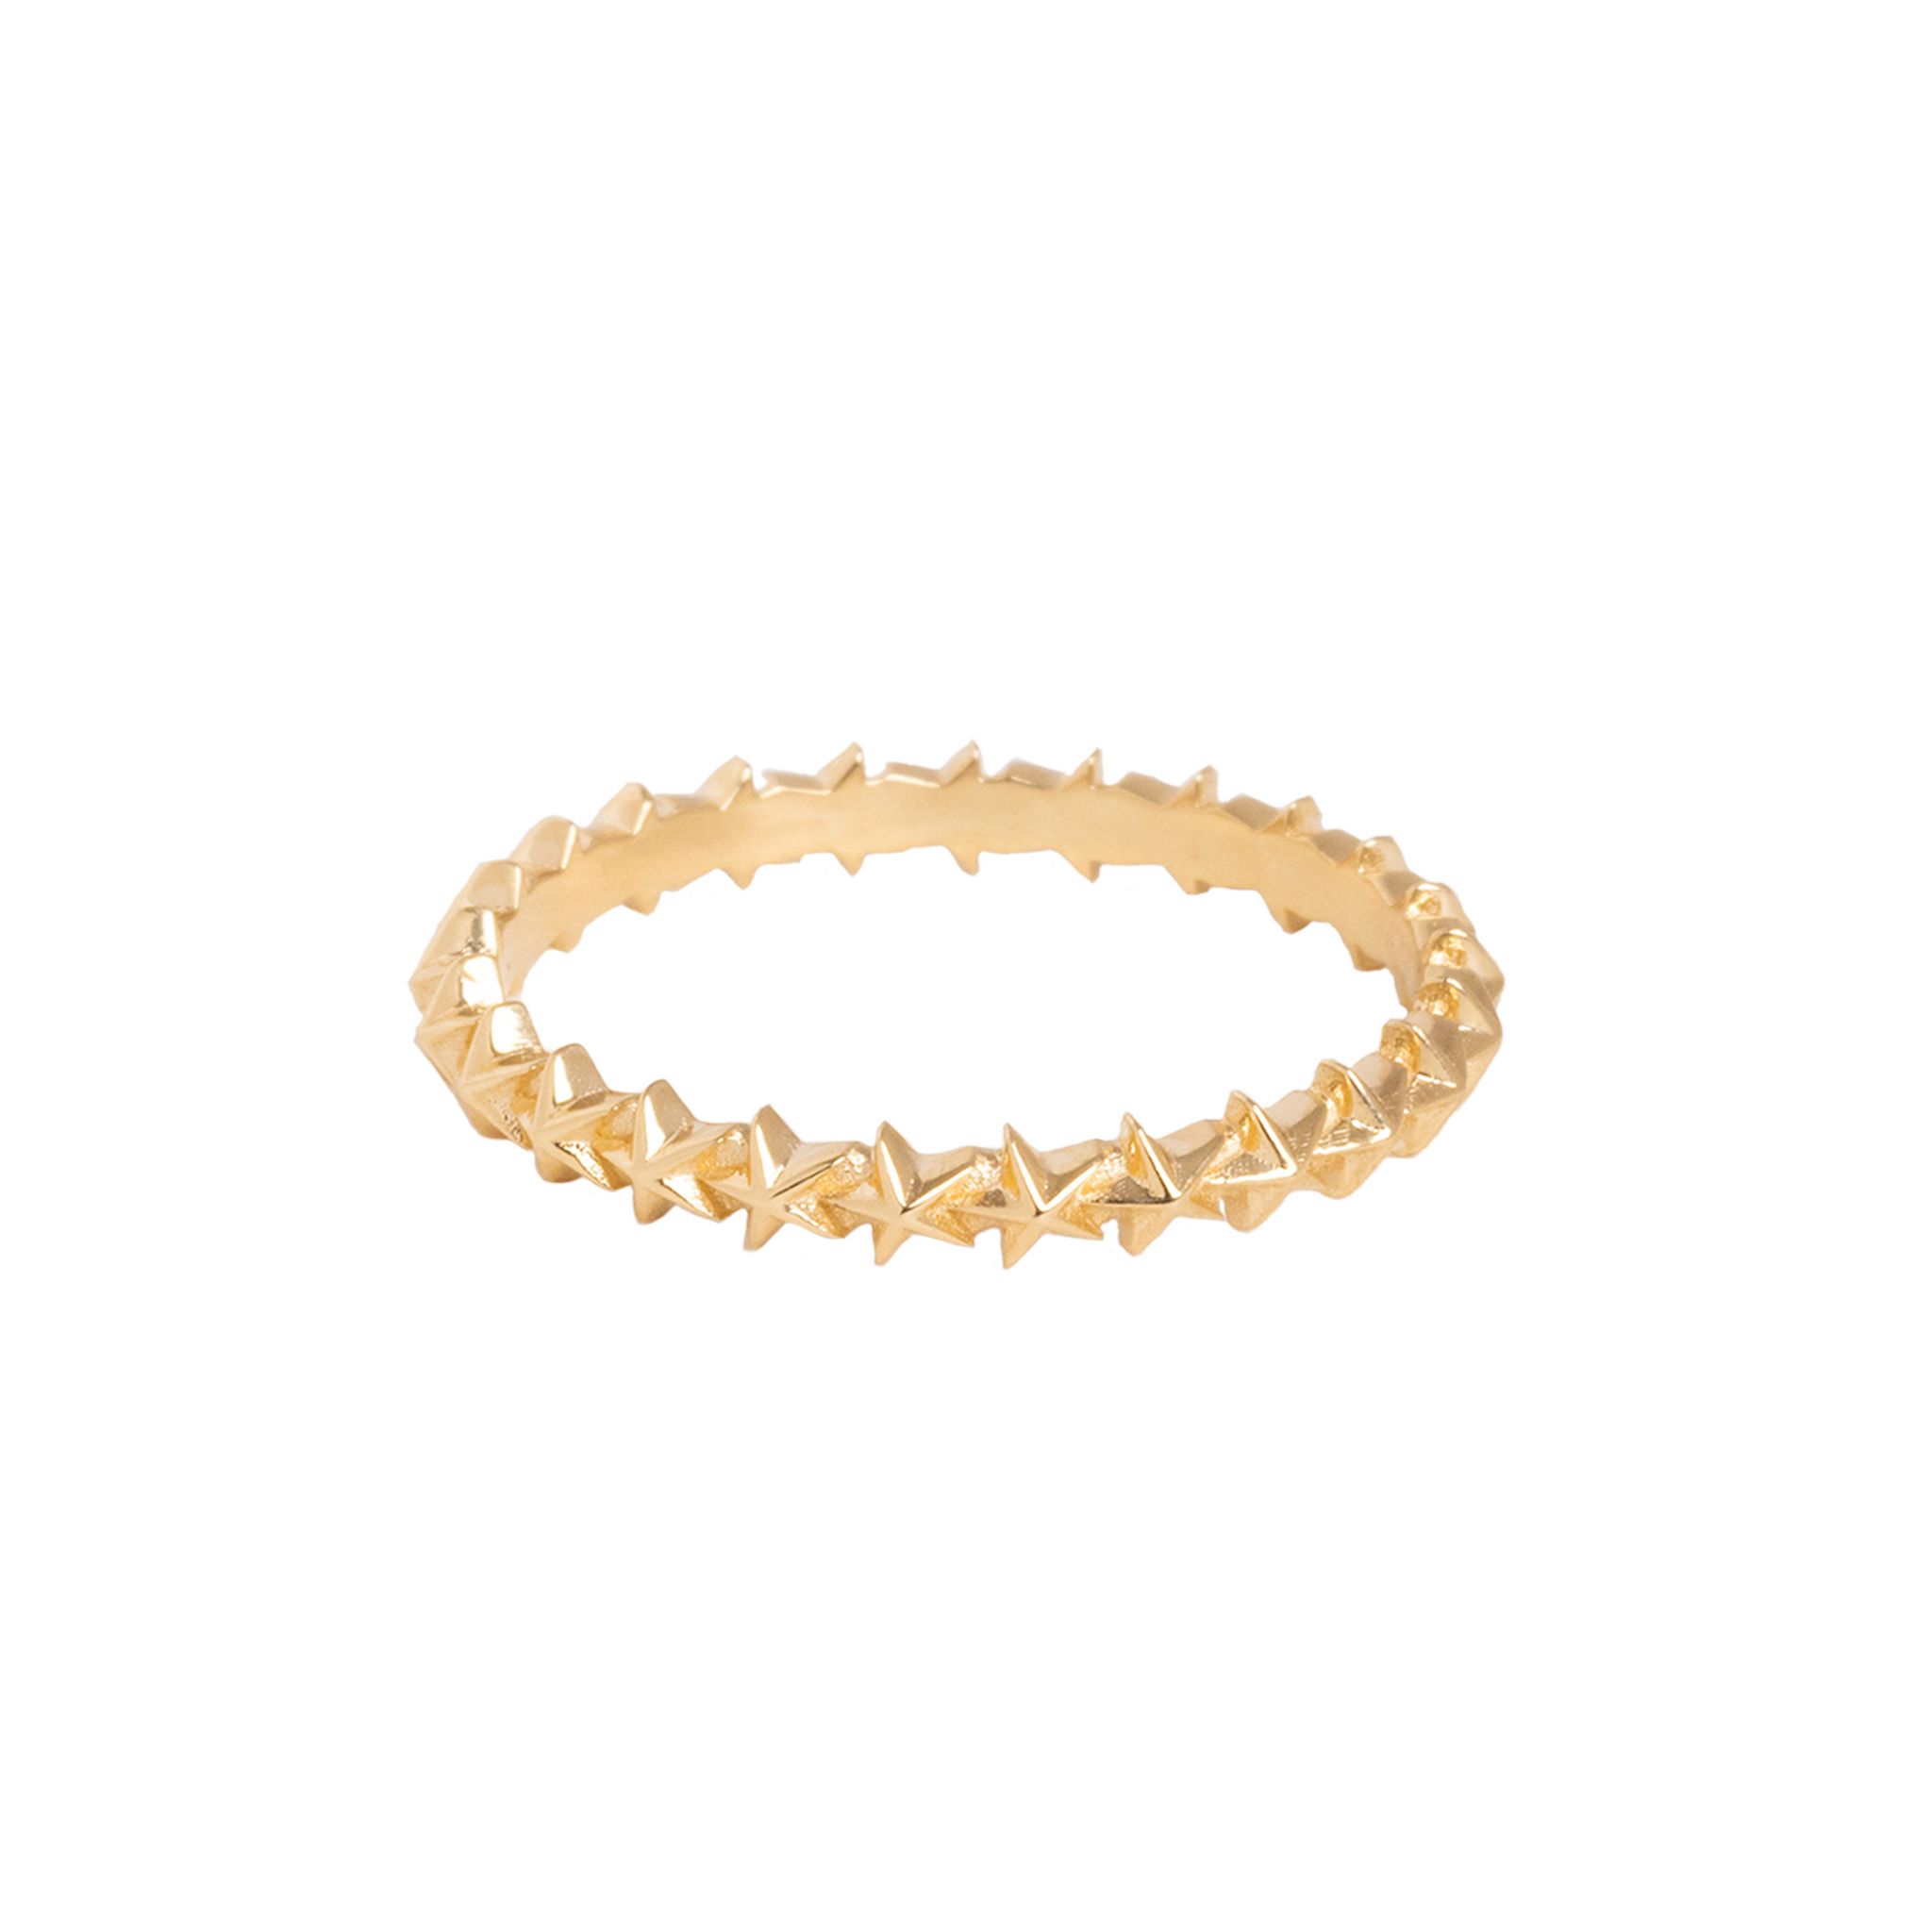 10K Gold Super Micro Star Stackable Ring on white background